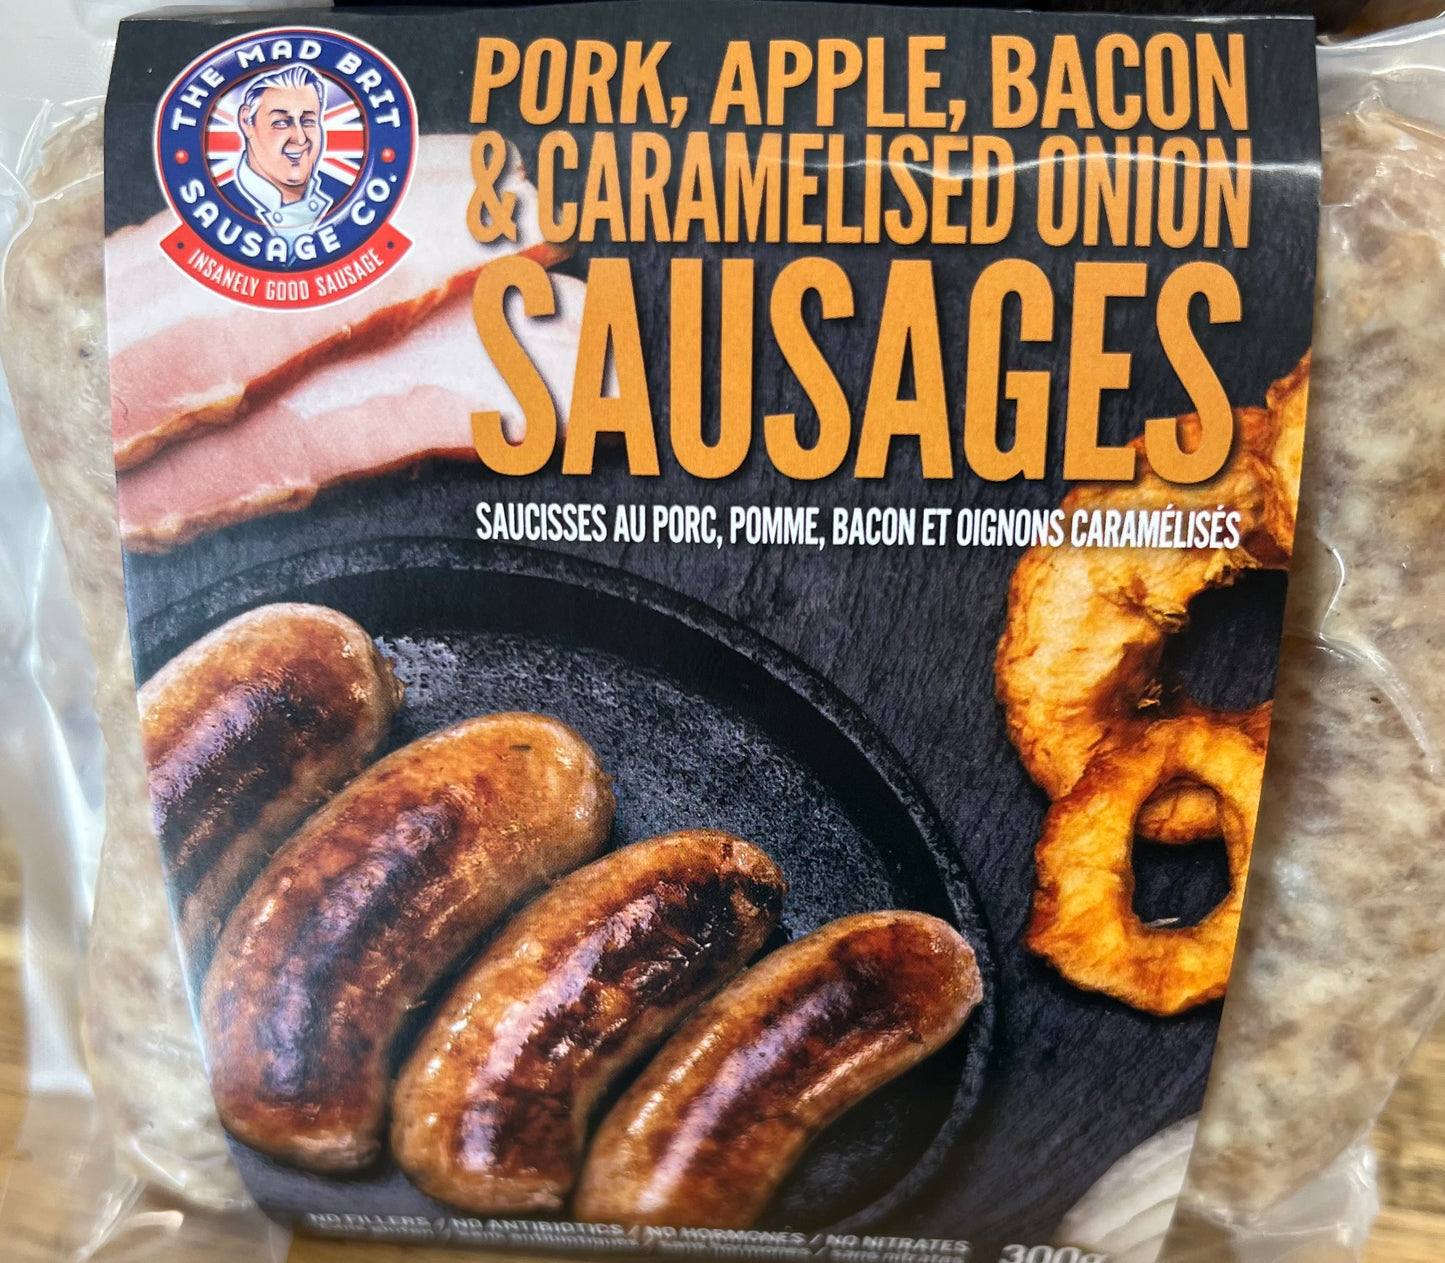 Mad Brit Sausage Co. - Pork, Apple, Bacon & Caramelized Onion Sausages (NEW)